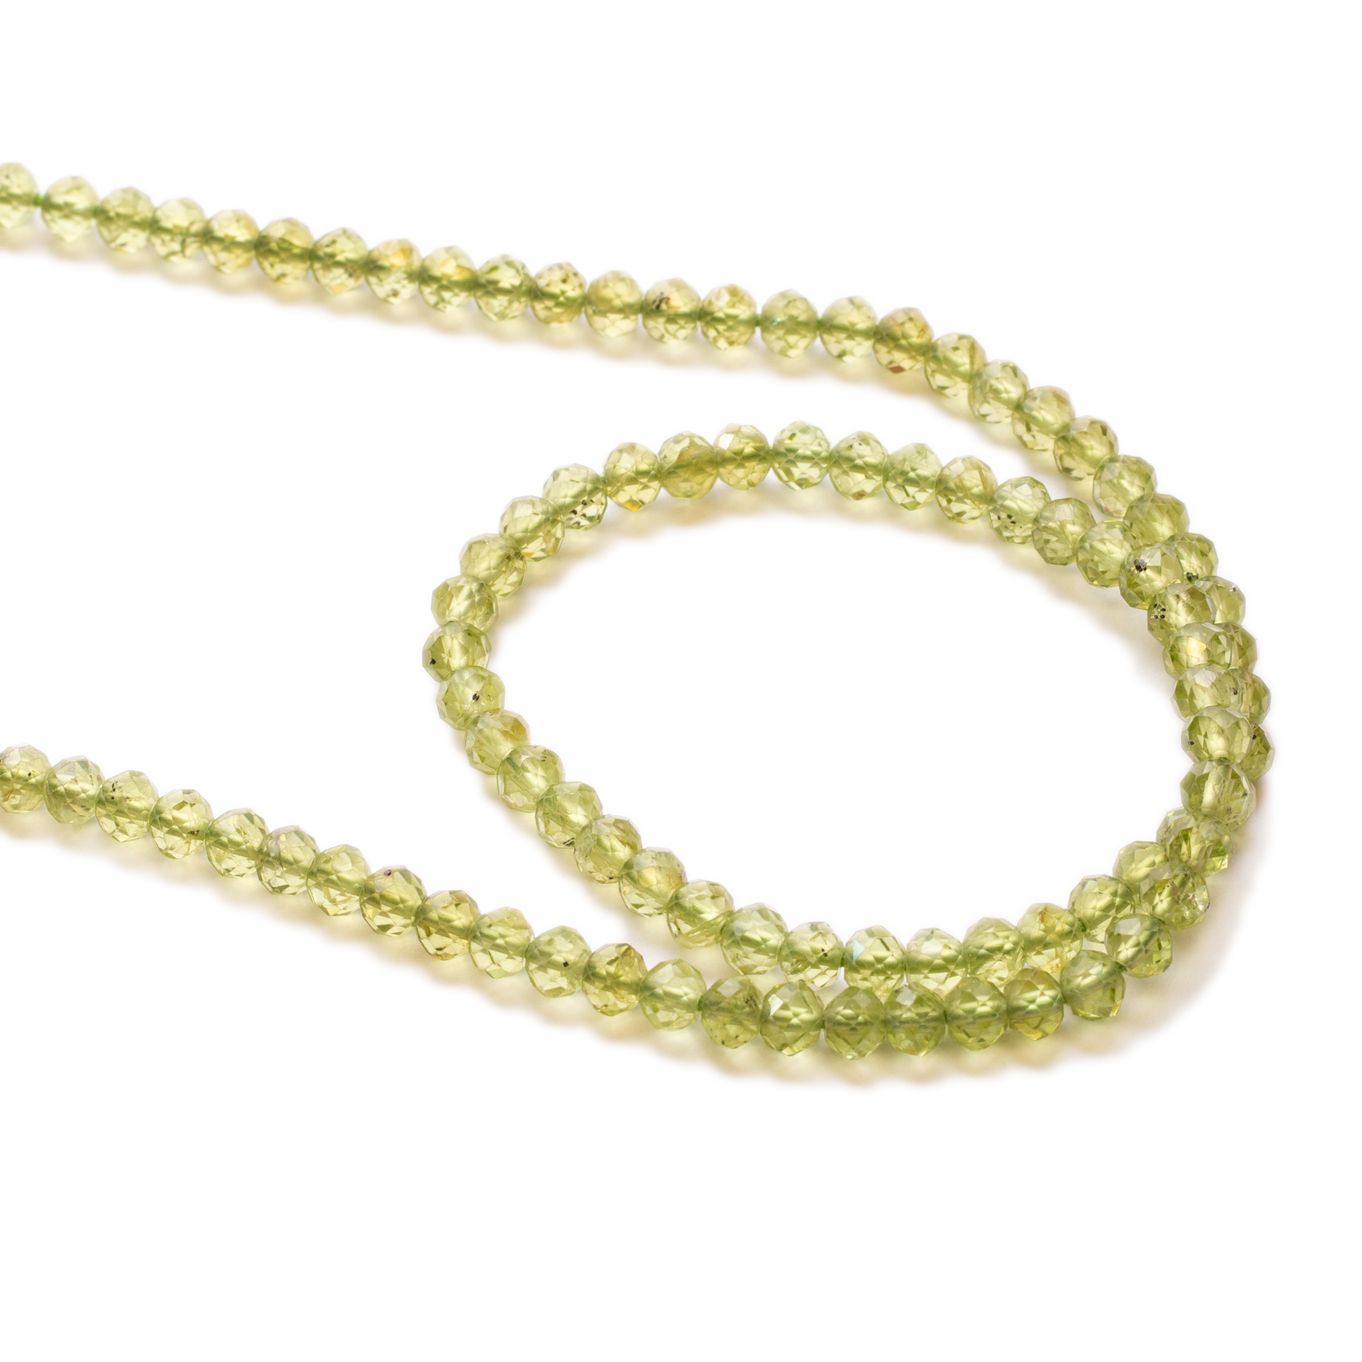 Peridot Faceted Rondelle Beads - Approx From 3mm